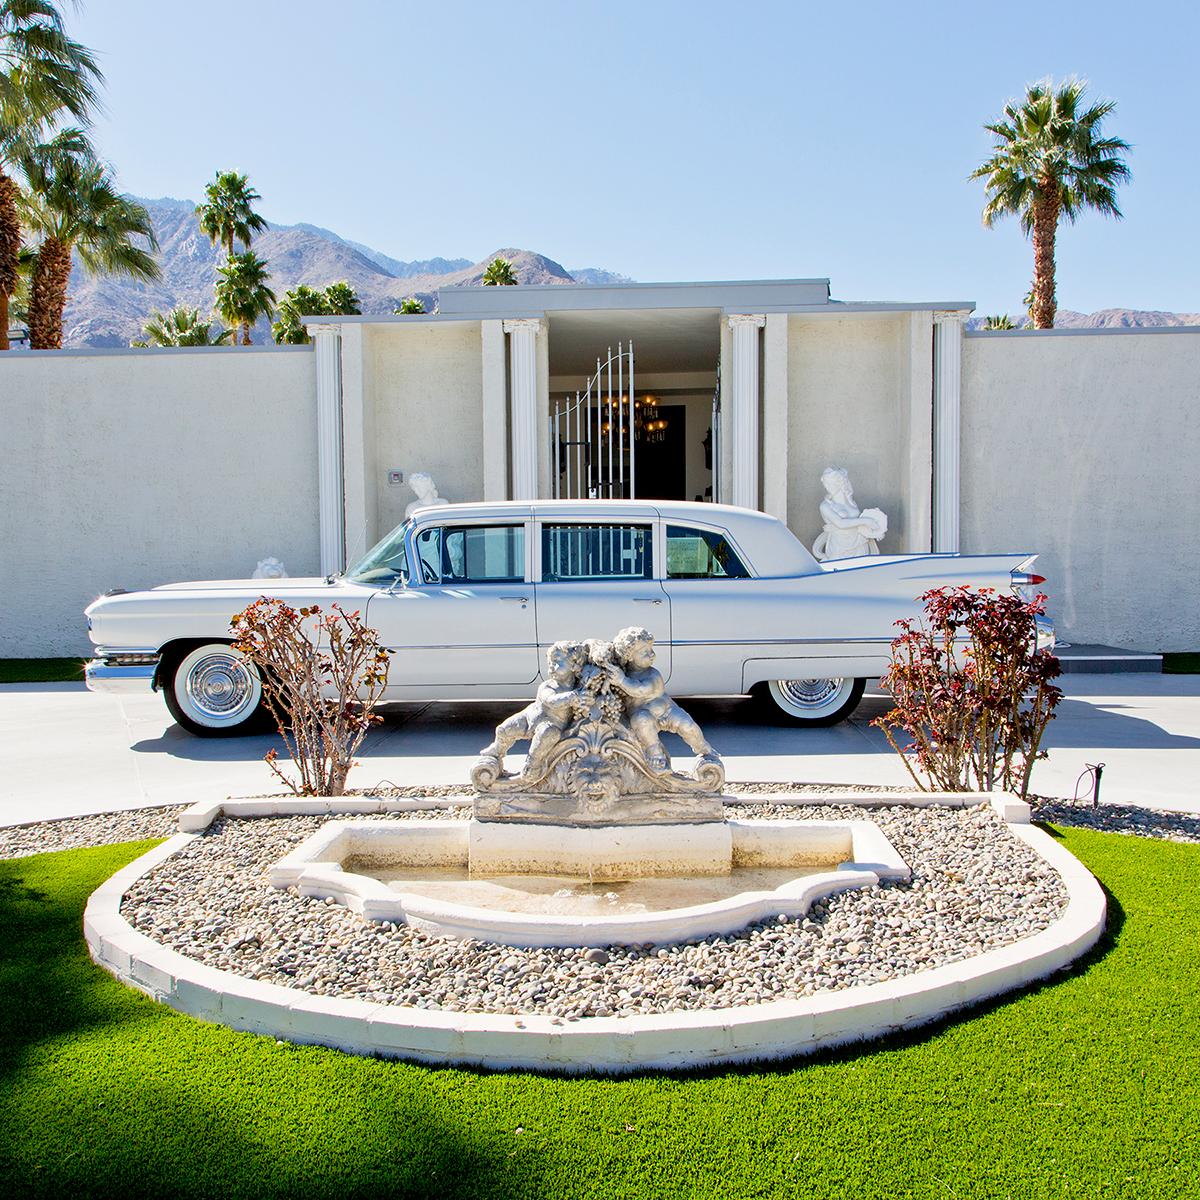 Piazza de Liberace by Nancy Baron is an 16.5 x 16.5 inch archival pigment print, available in an edition of 10. The photograph features the front of Liberace's house, with a white car and small fountain in front. 
This photograph is from Nancy